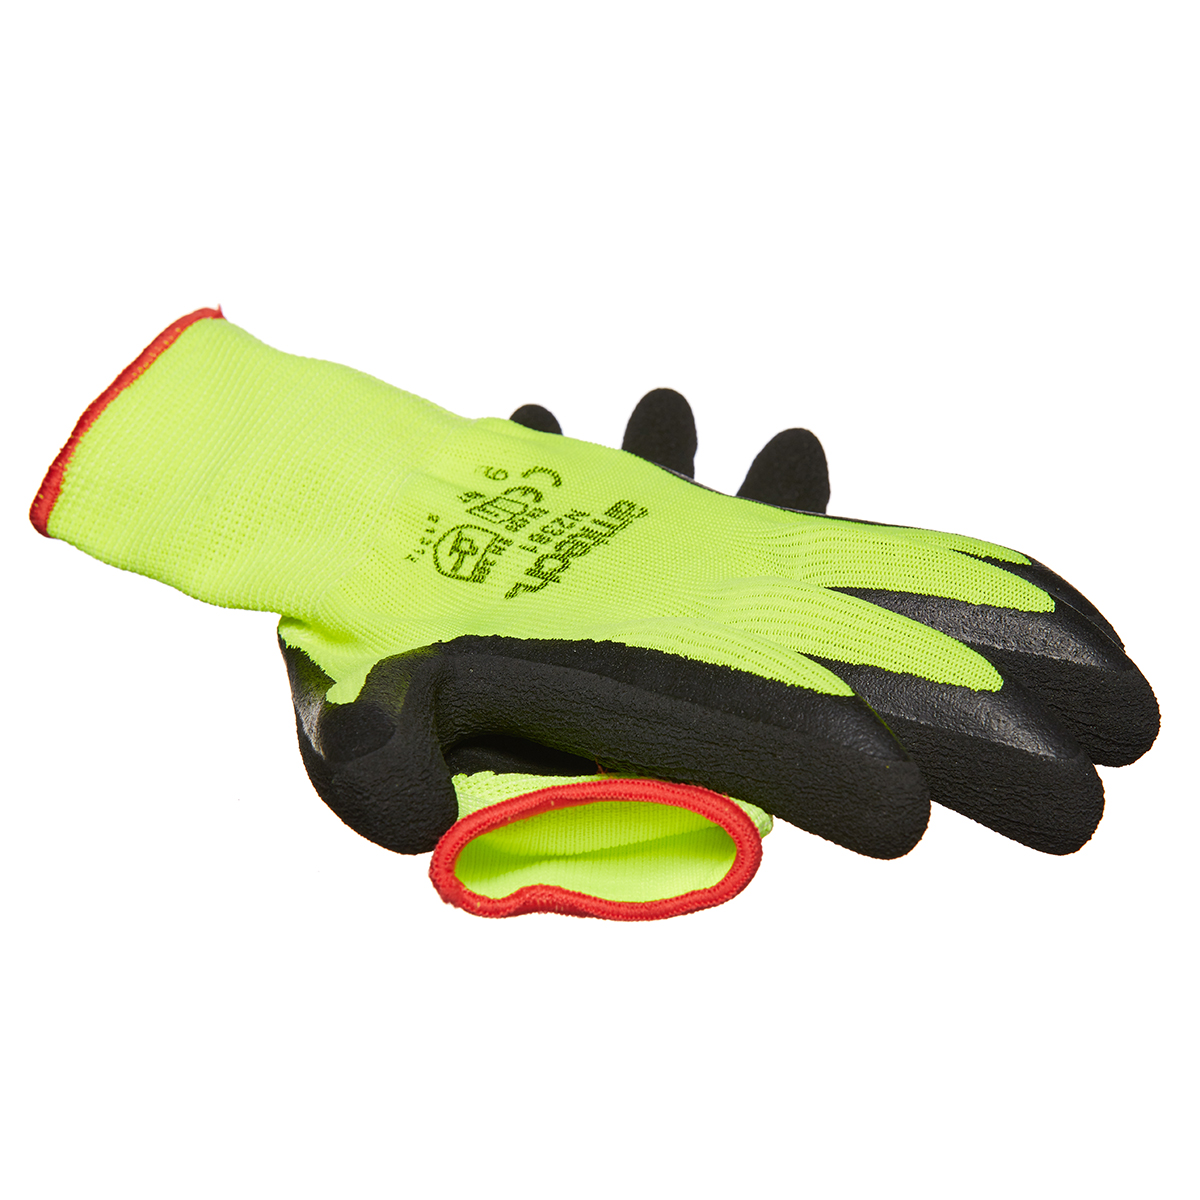 Amtech Hi-Vis Latex Coated Gloves Large Size:9 Durable High Quality 